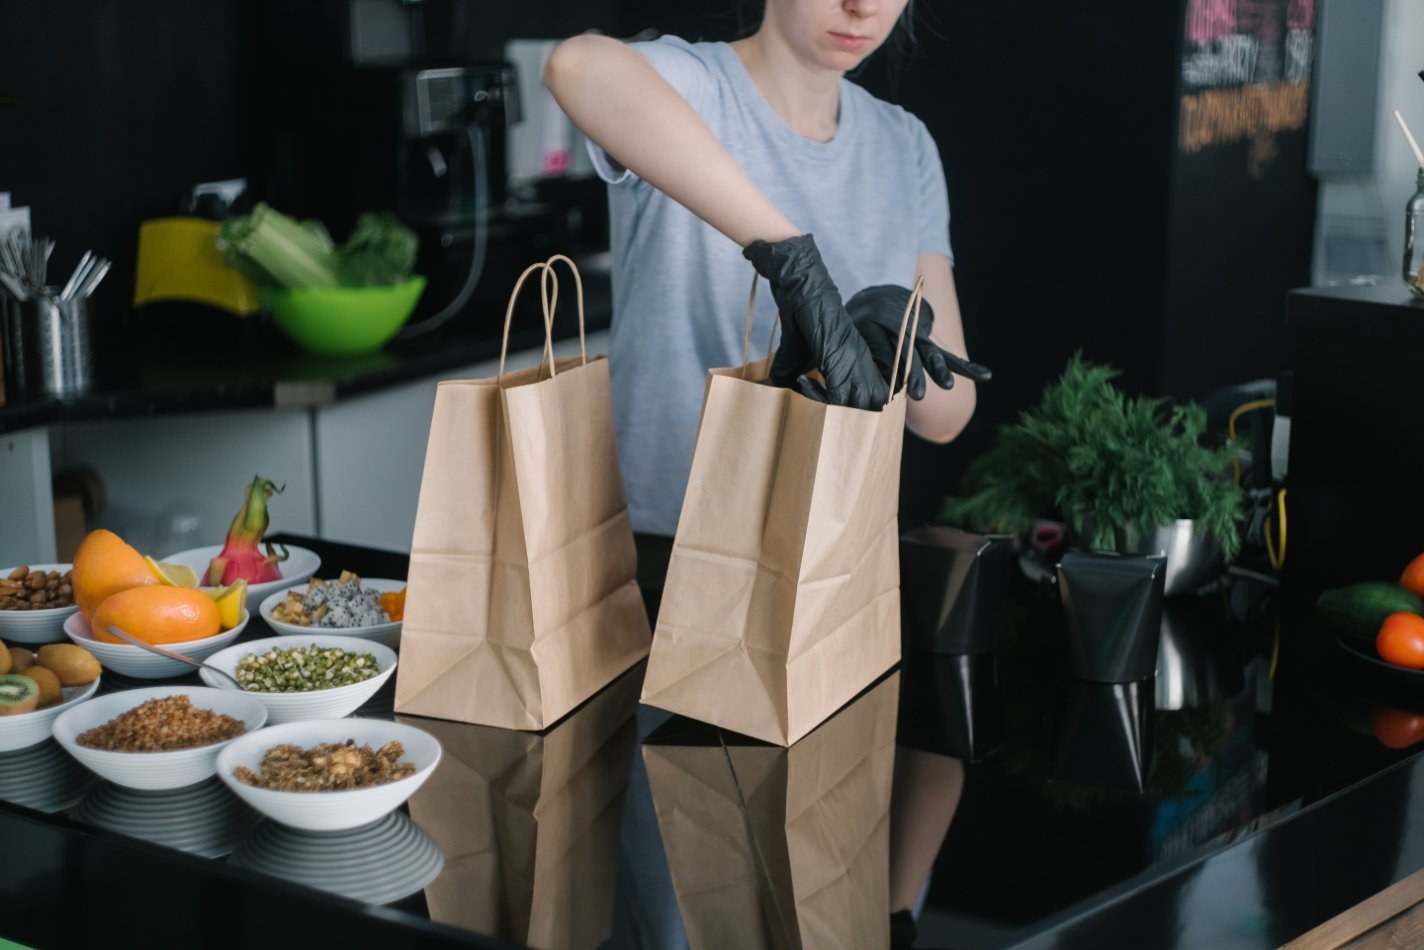 Person putting food into bags